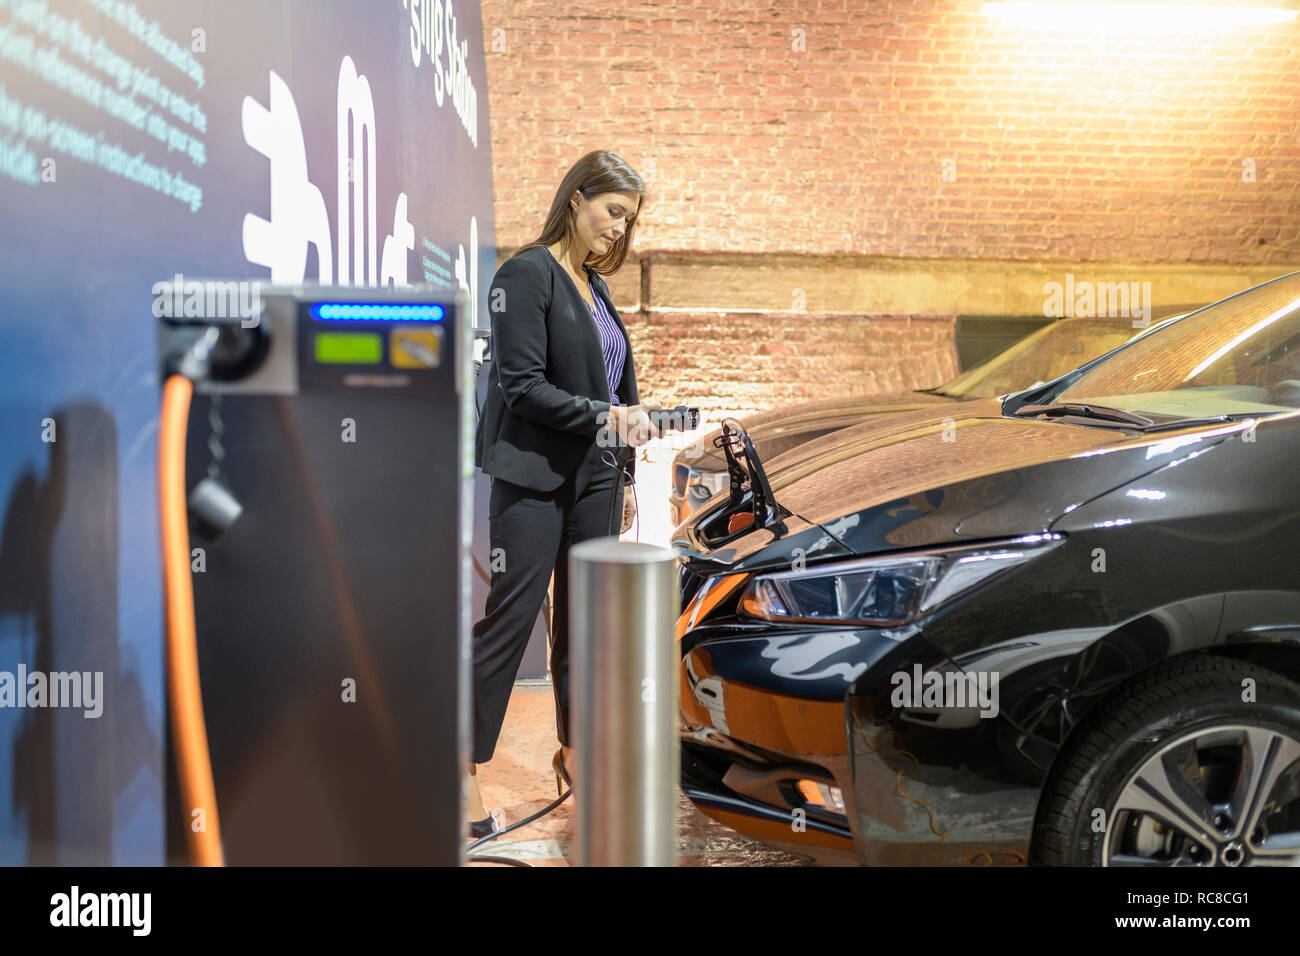 Businesswoman plugging in car at electric vehicle charging station, Manchester, UK Stock Photo